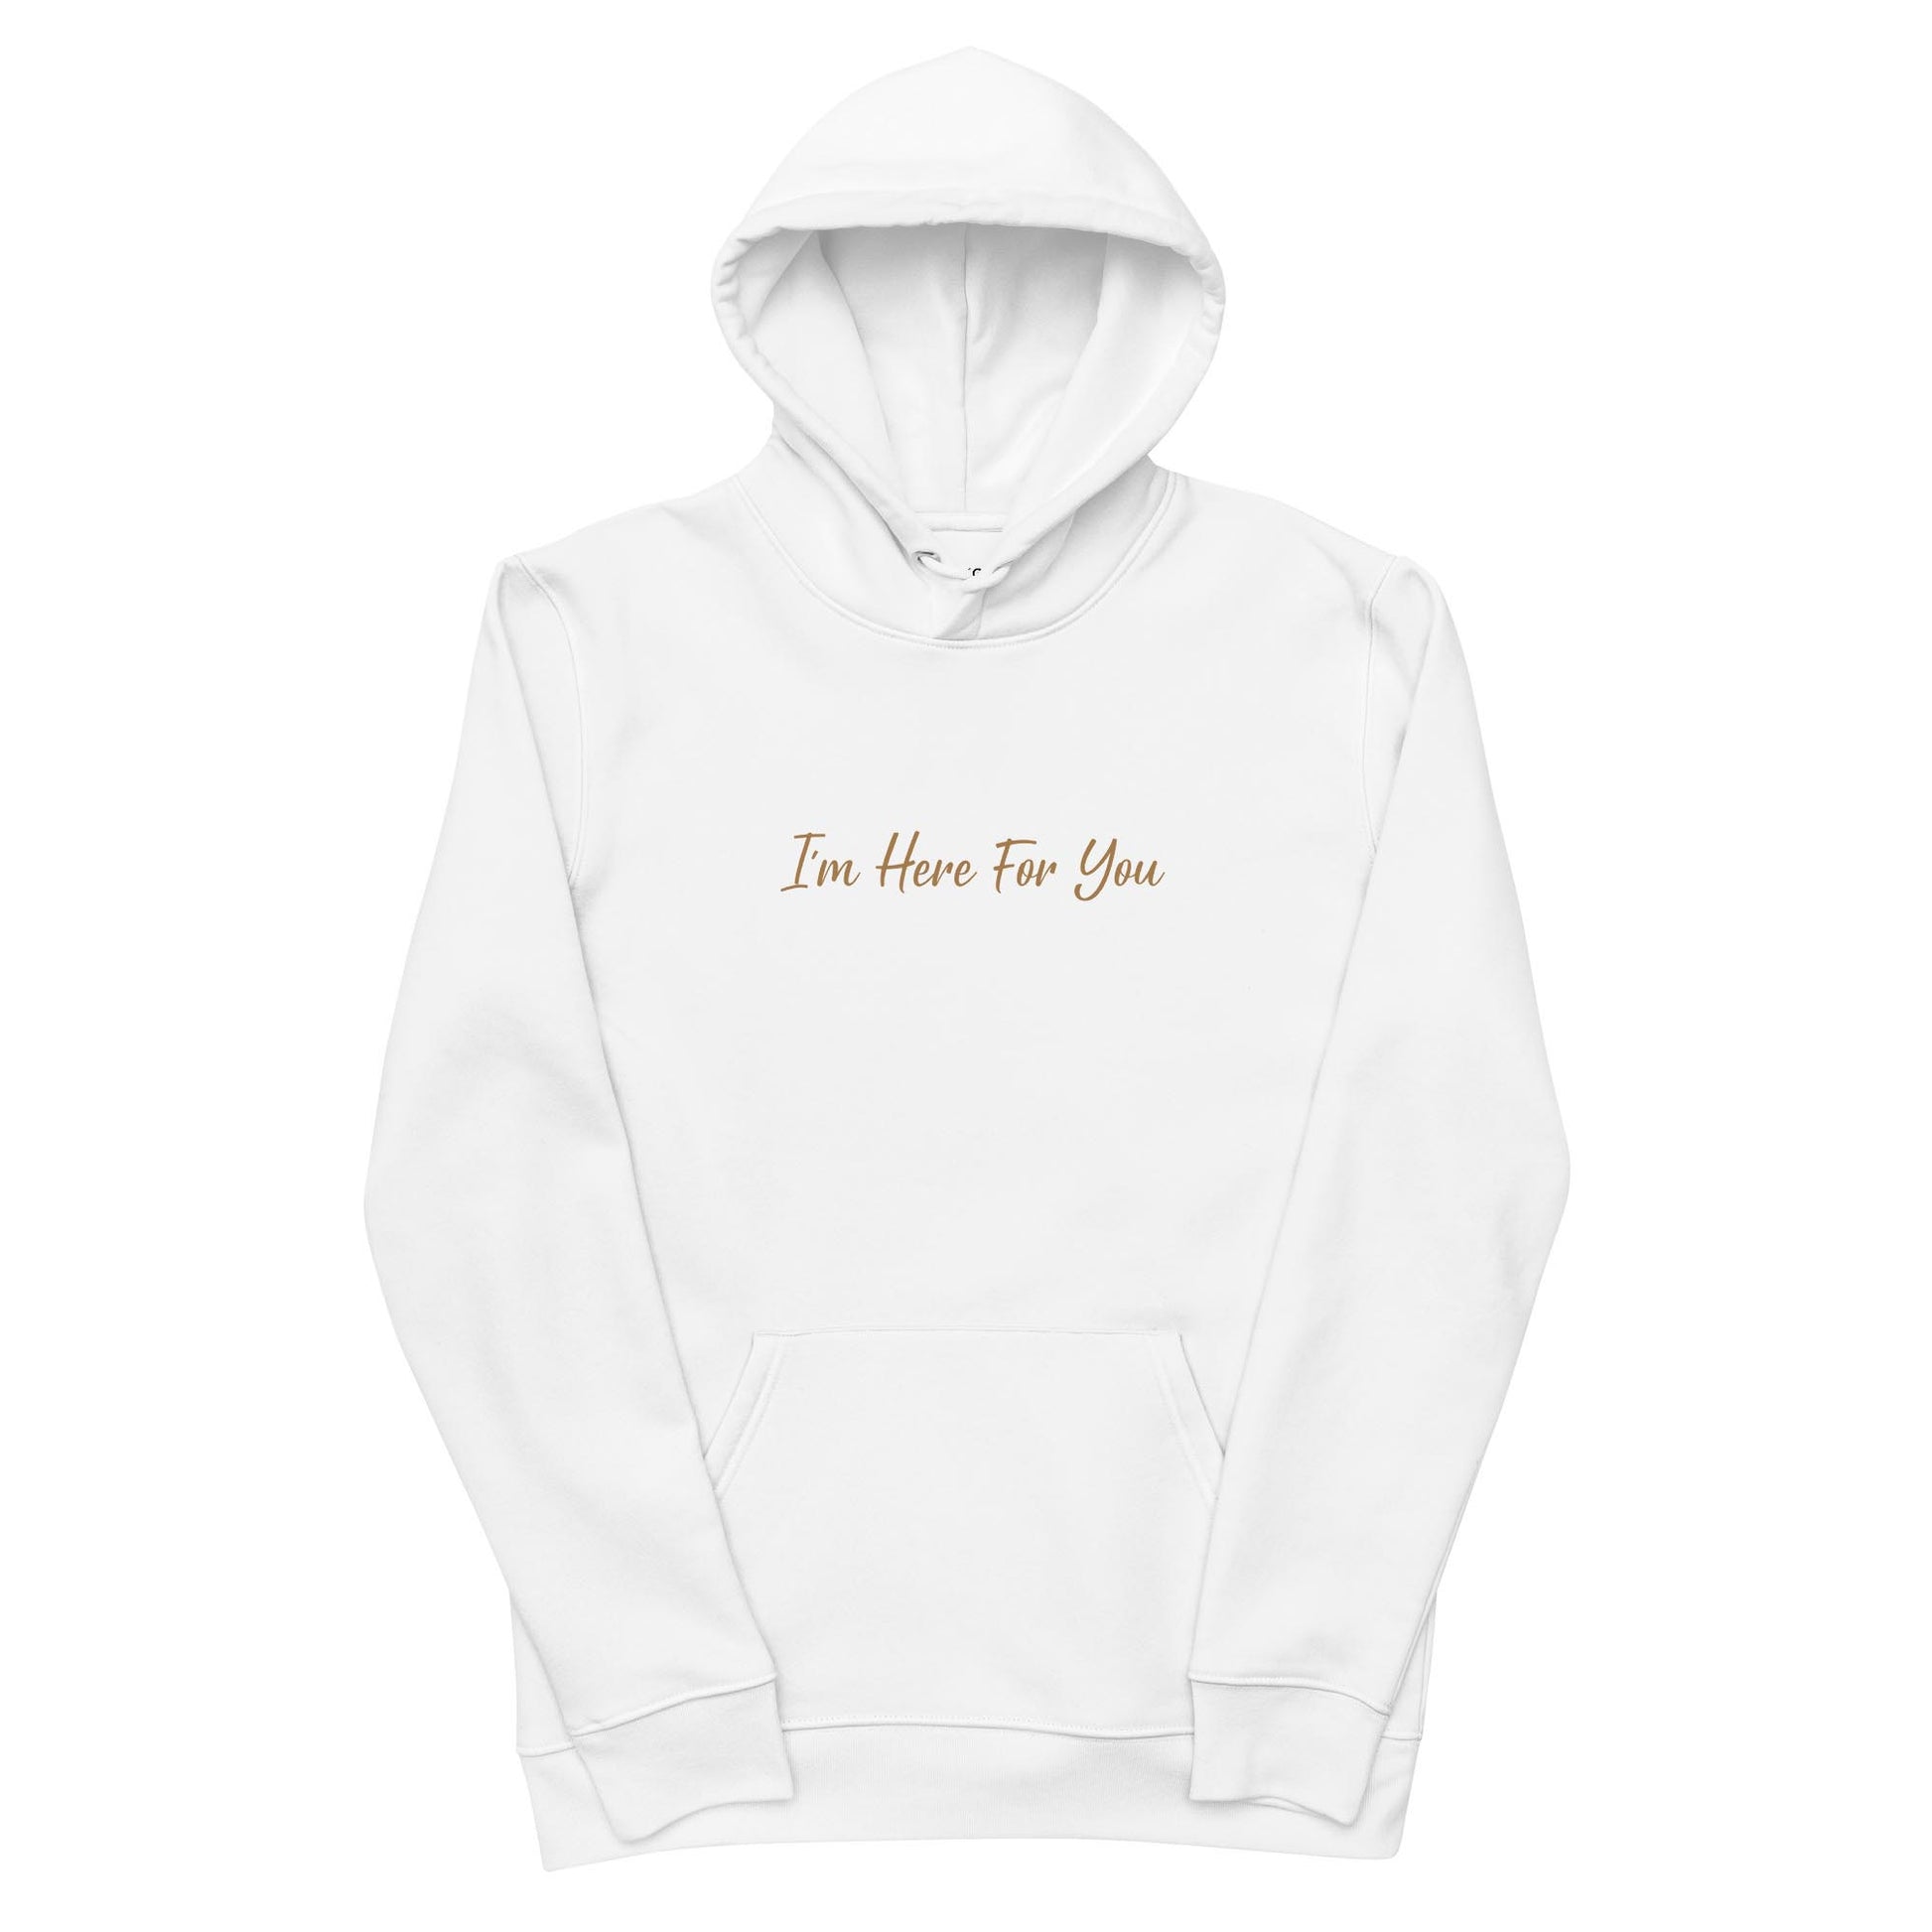 Men white inspirational hoodie with inspirational quote, "I'm Here For You."